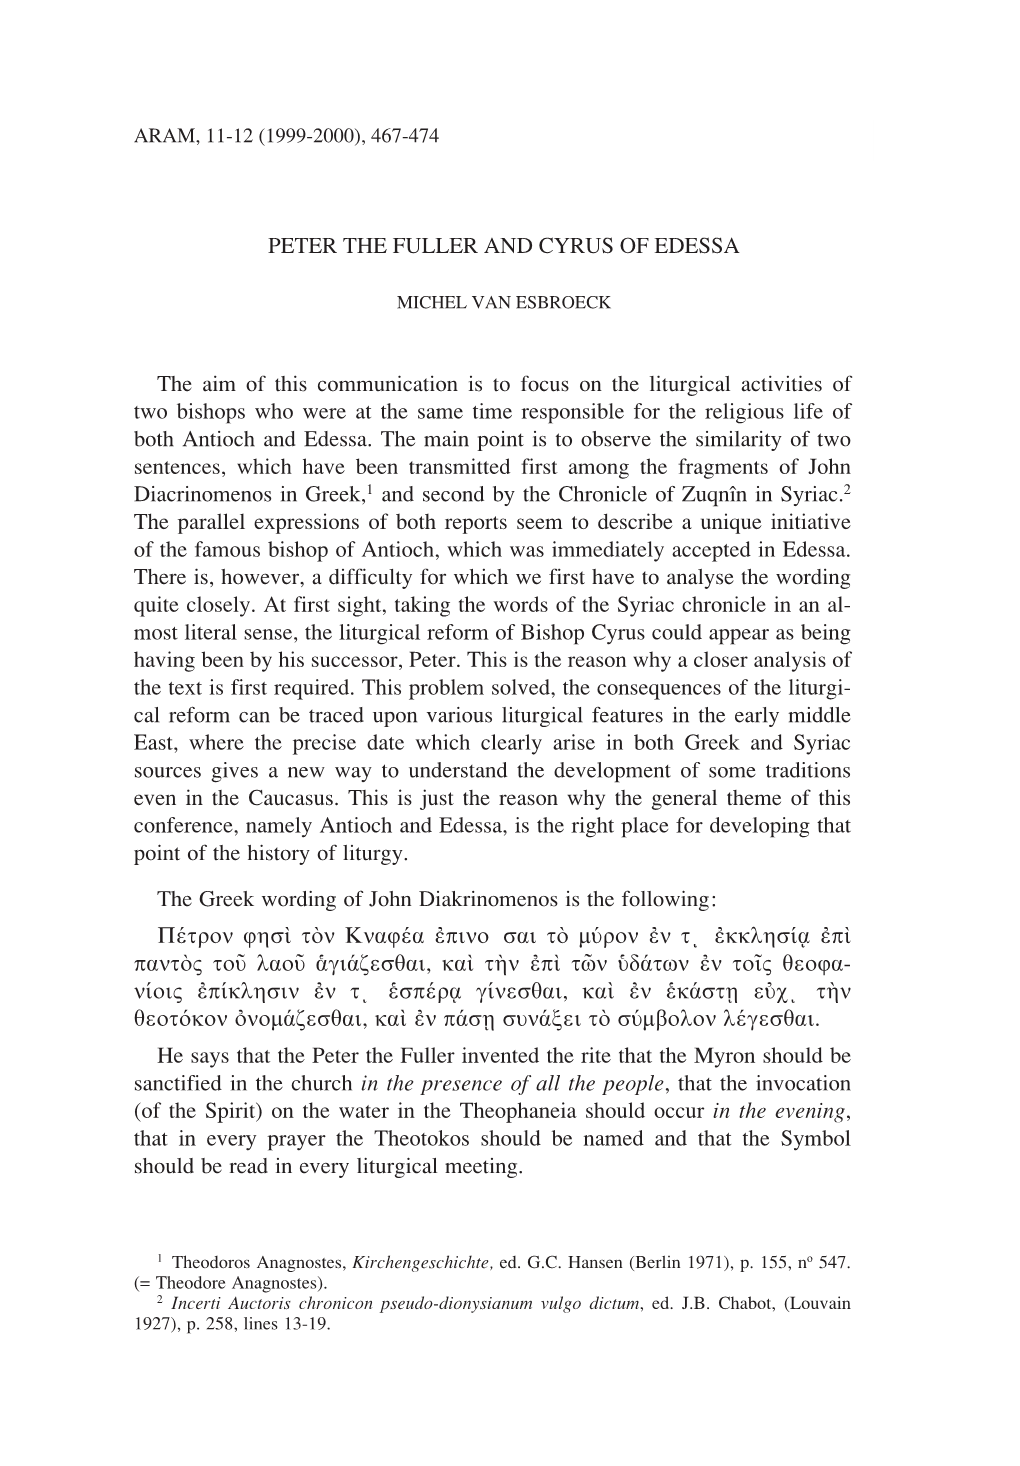 467 PETER the FULLER and CYRUS of EDESSA the Aim Of